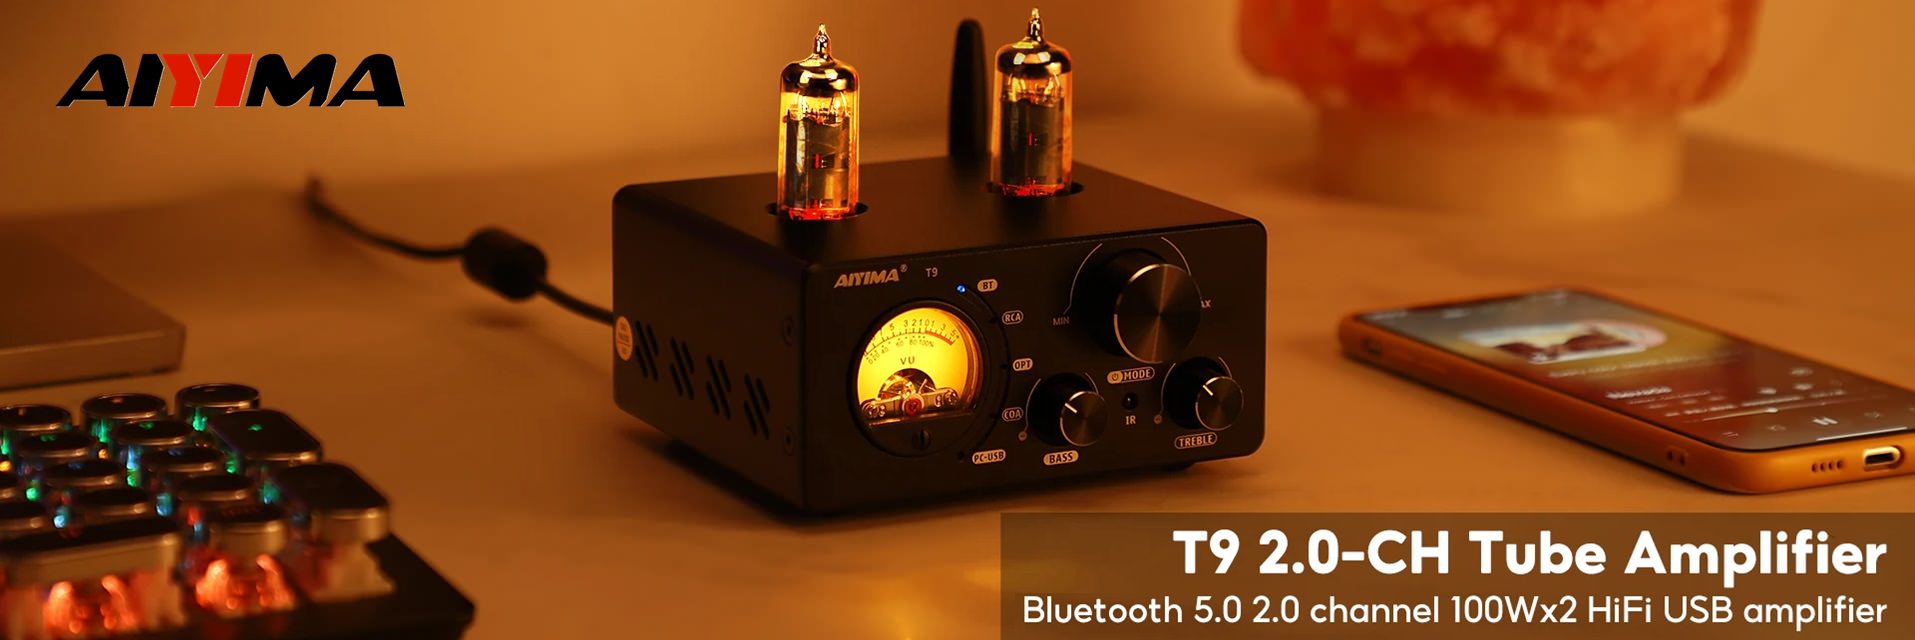 AIYIMA T9 Tube Amplifier